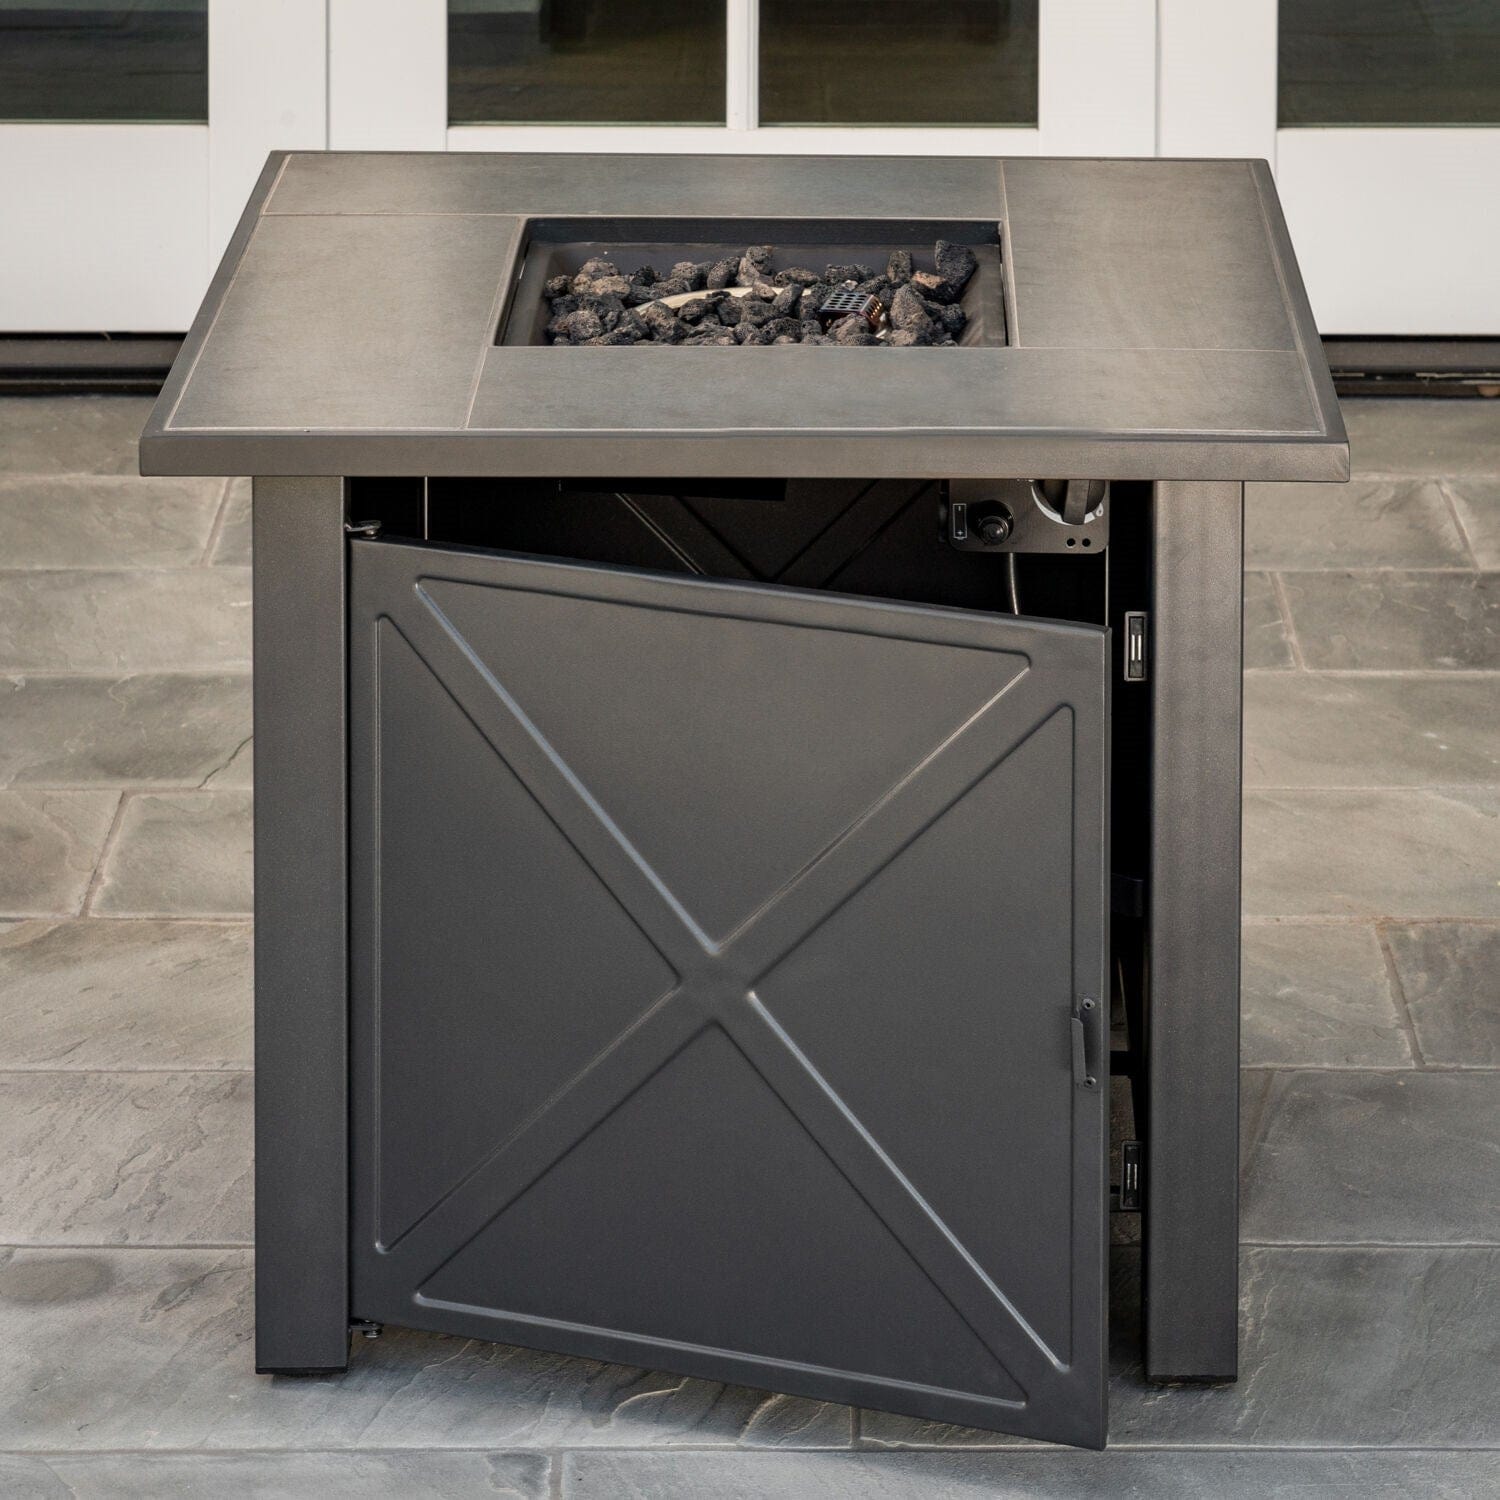 Hanover Fire Table Hanover - Naples Steel Gas Fire Pit with Tile Top and Light Gray Lava Rocks | 30x30 | NAPLES1PCFP